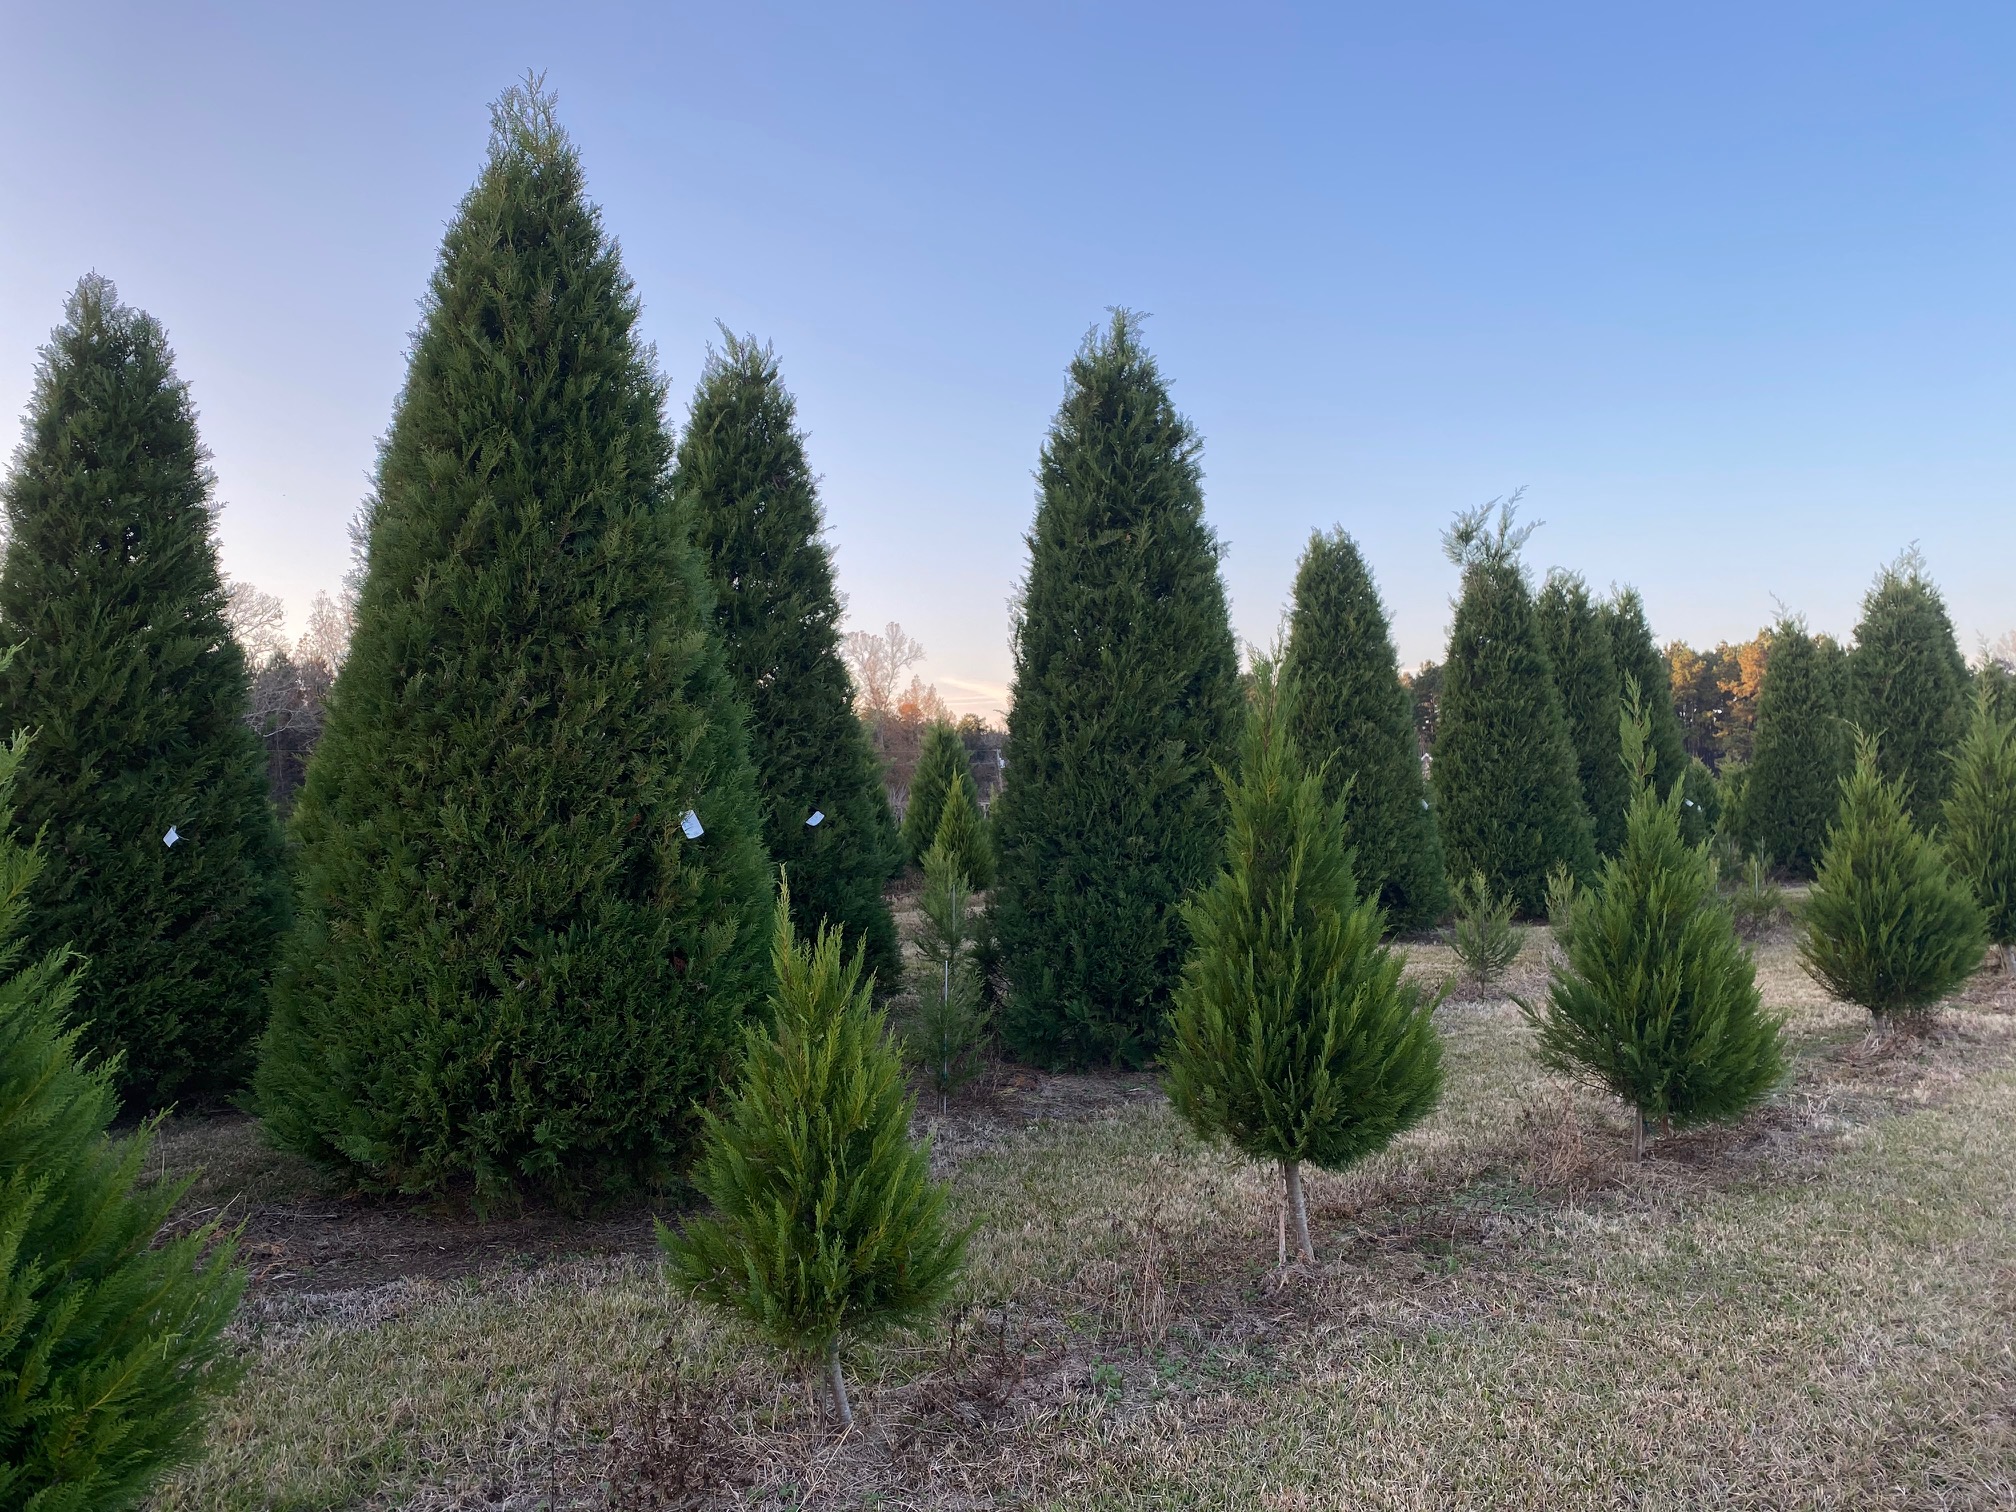 what should I bring to cut down a tree at Steele's Tree Farm?